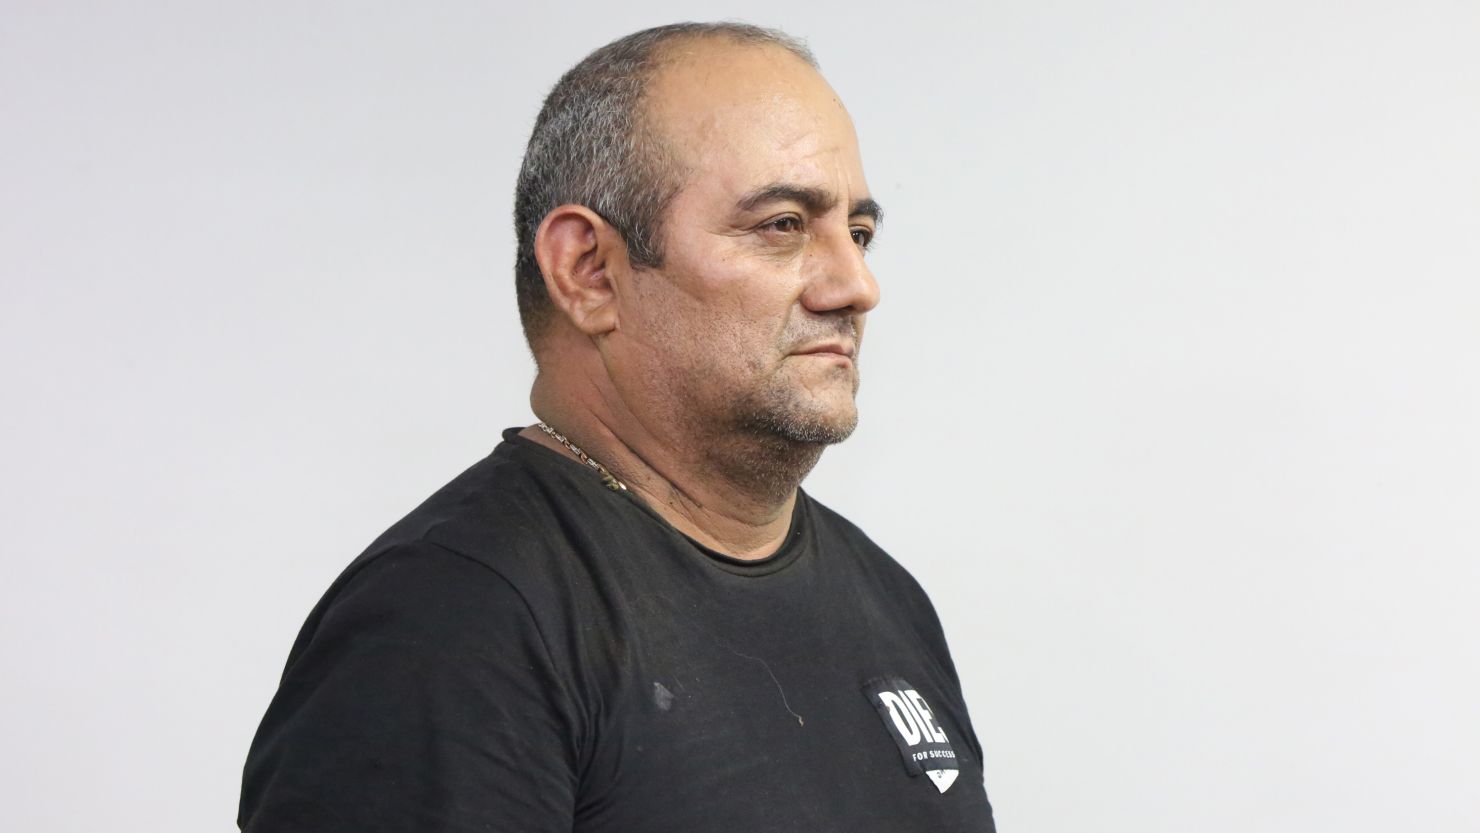 Dairo Antonio Úsuga David was captured in Colombia in October 2021 and later extradited to the US.